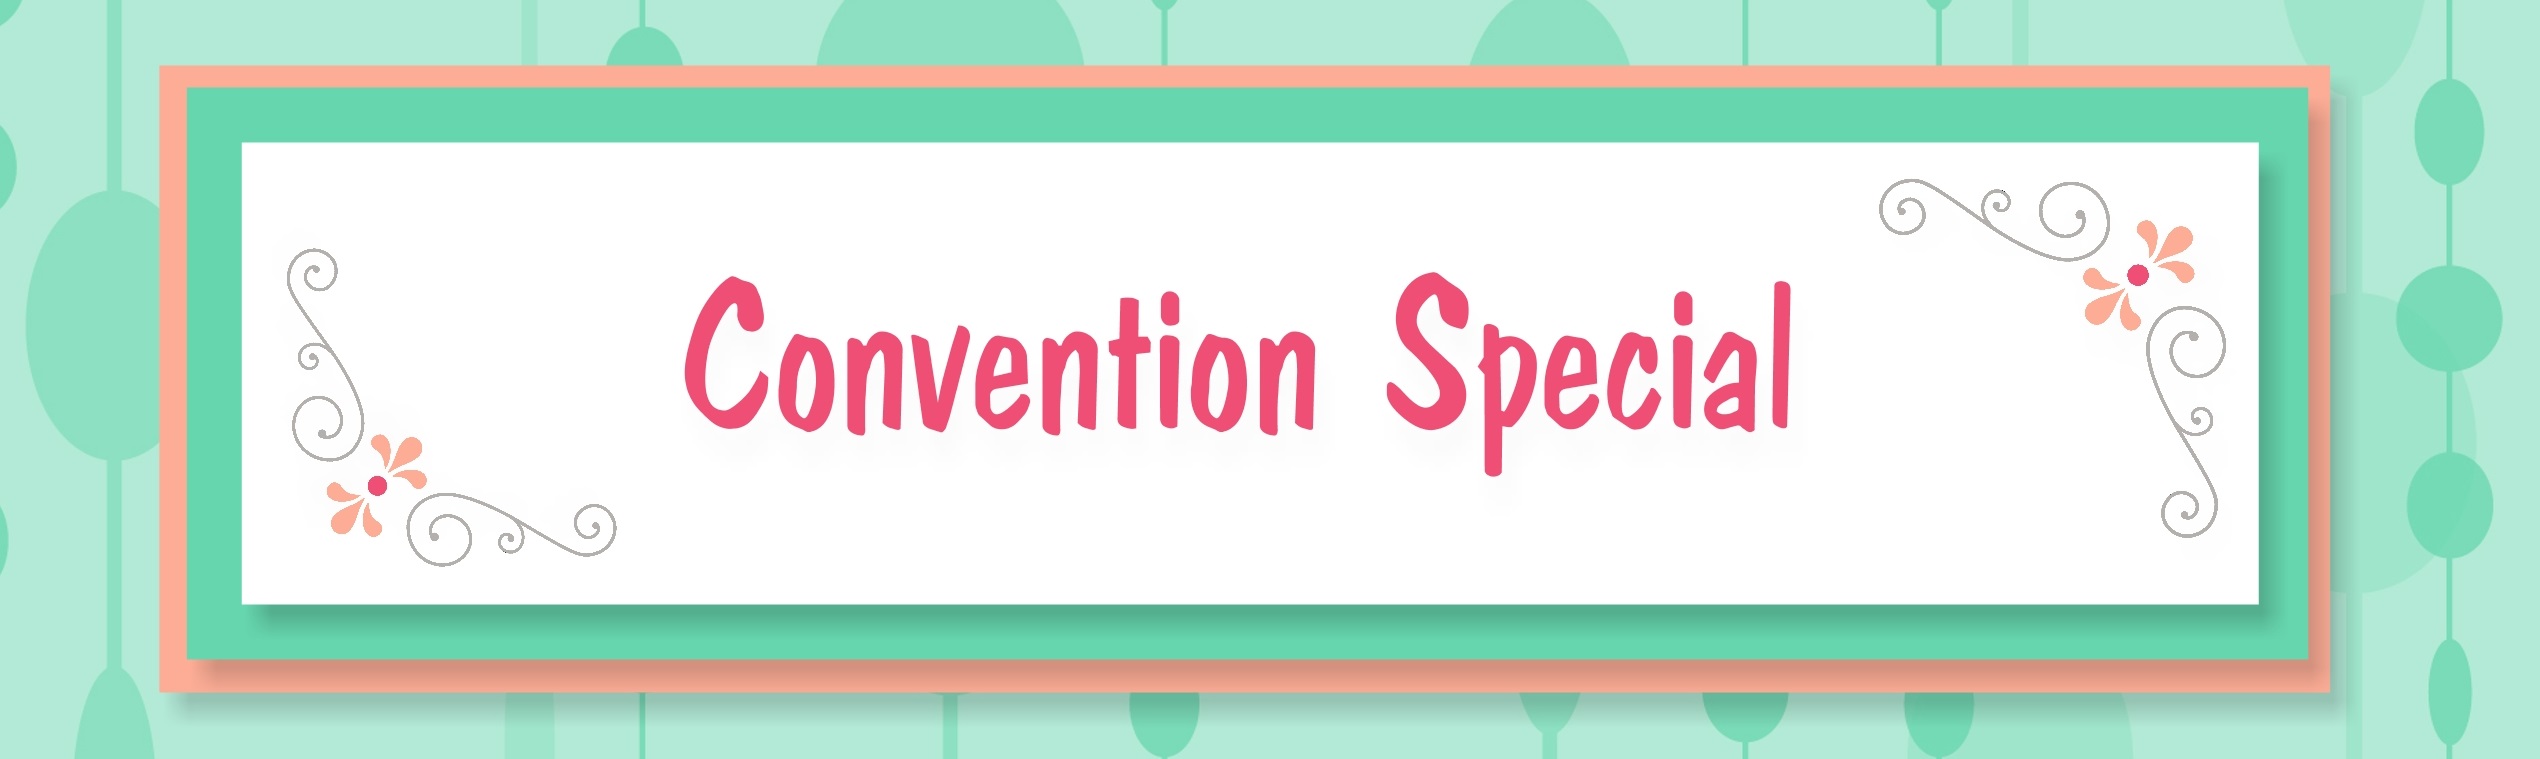 convention special banner